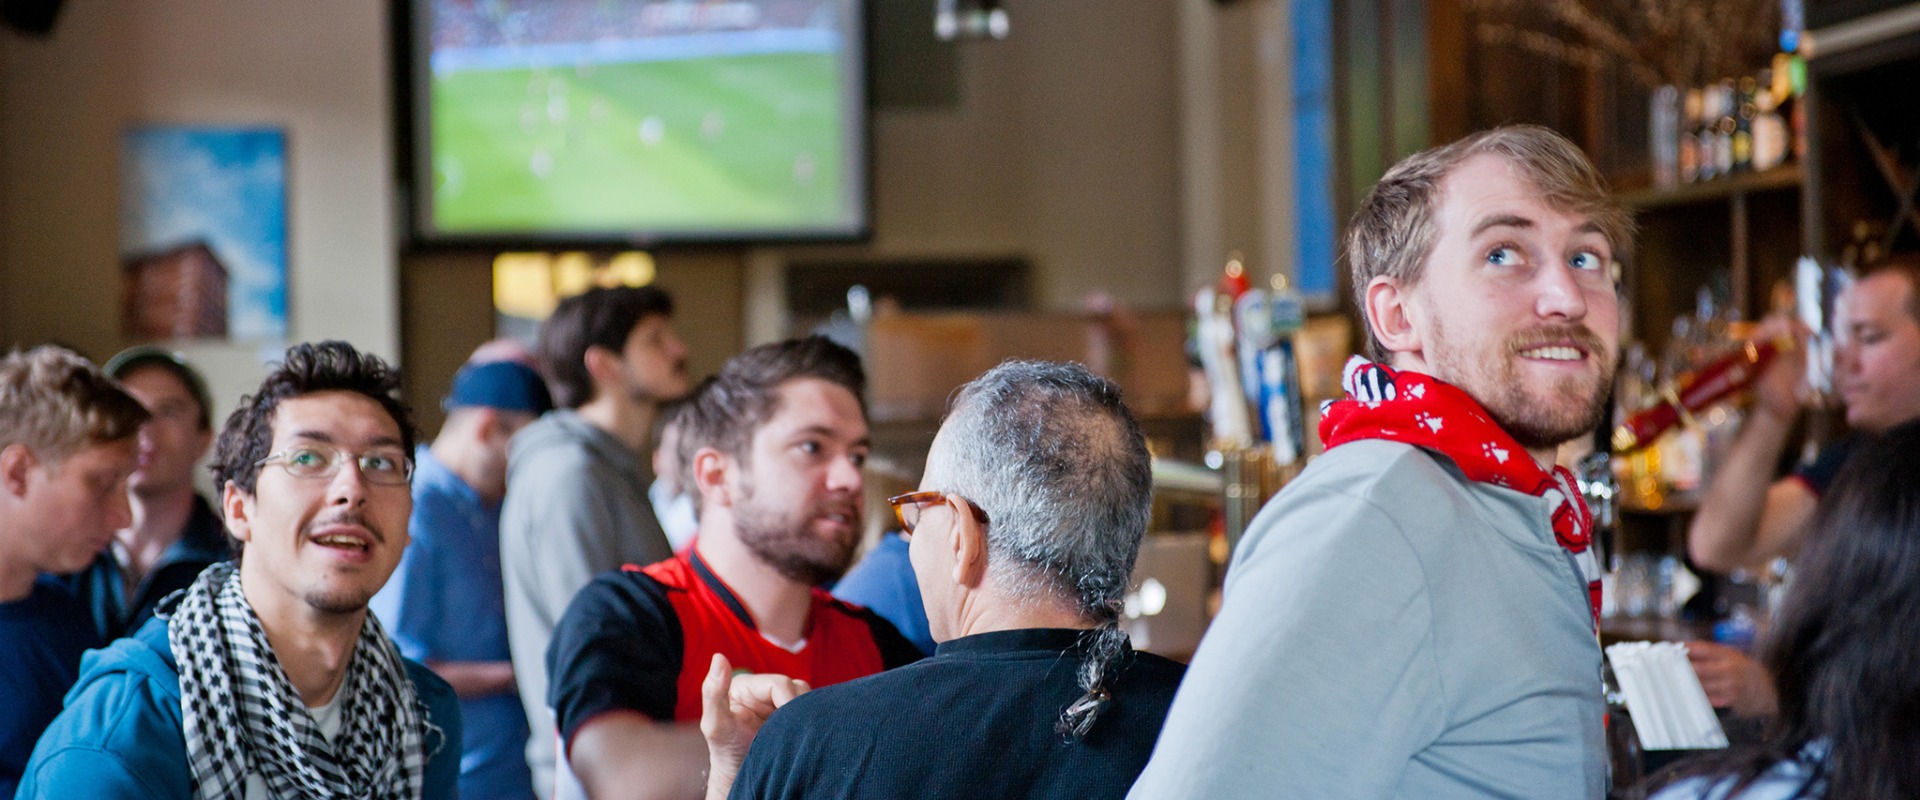 The Ultimate Guide to the Best Sports Bars in Brooklyn, NY for Drink Specials